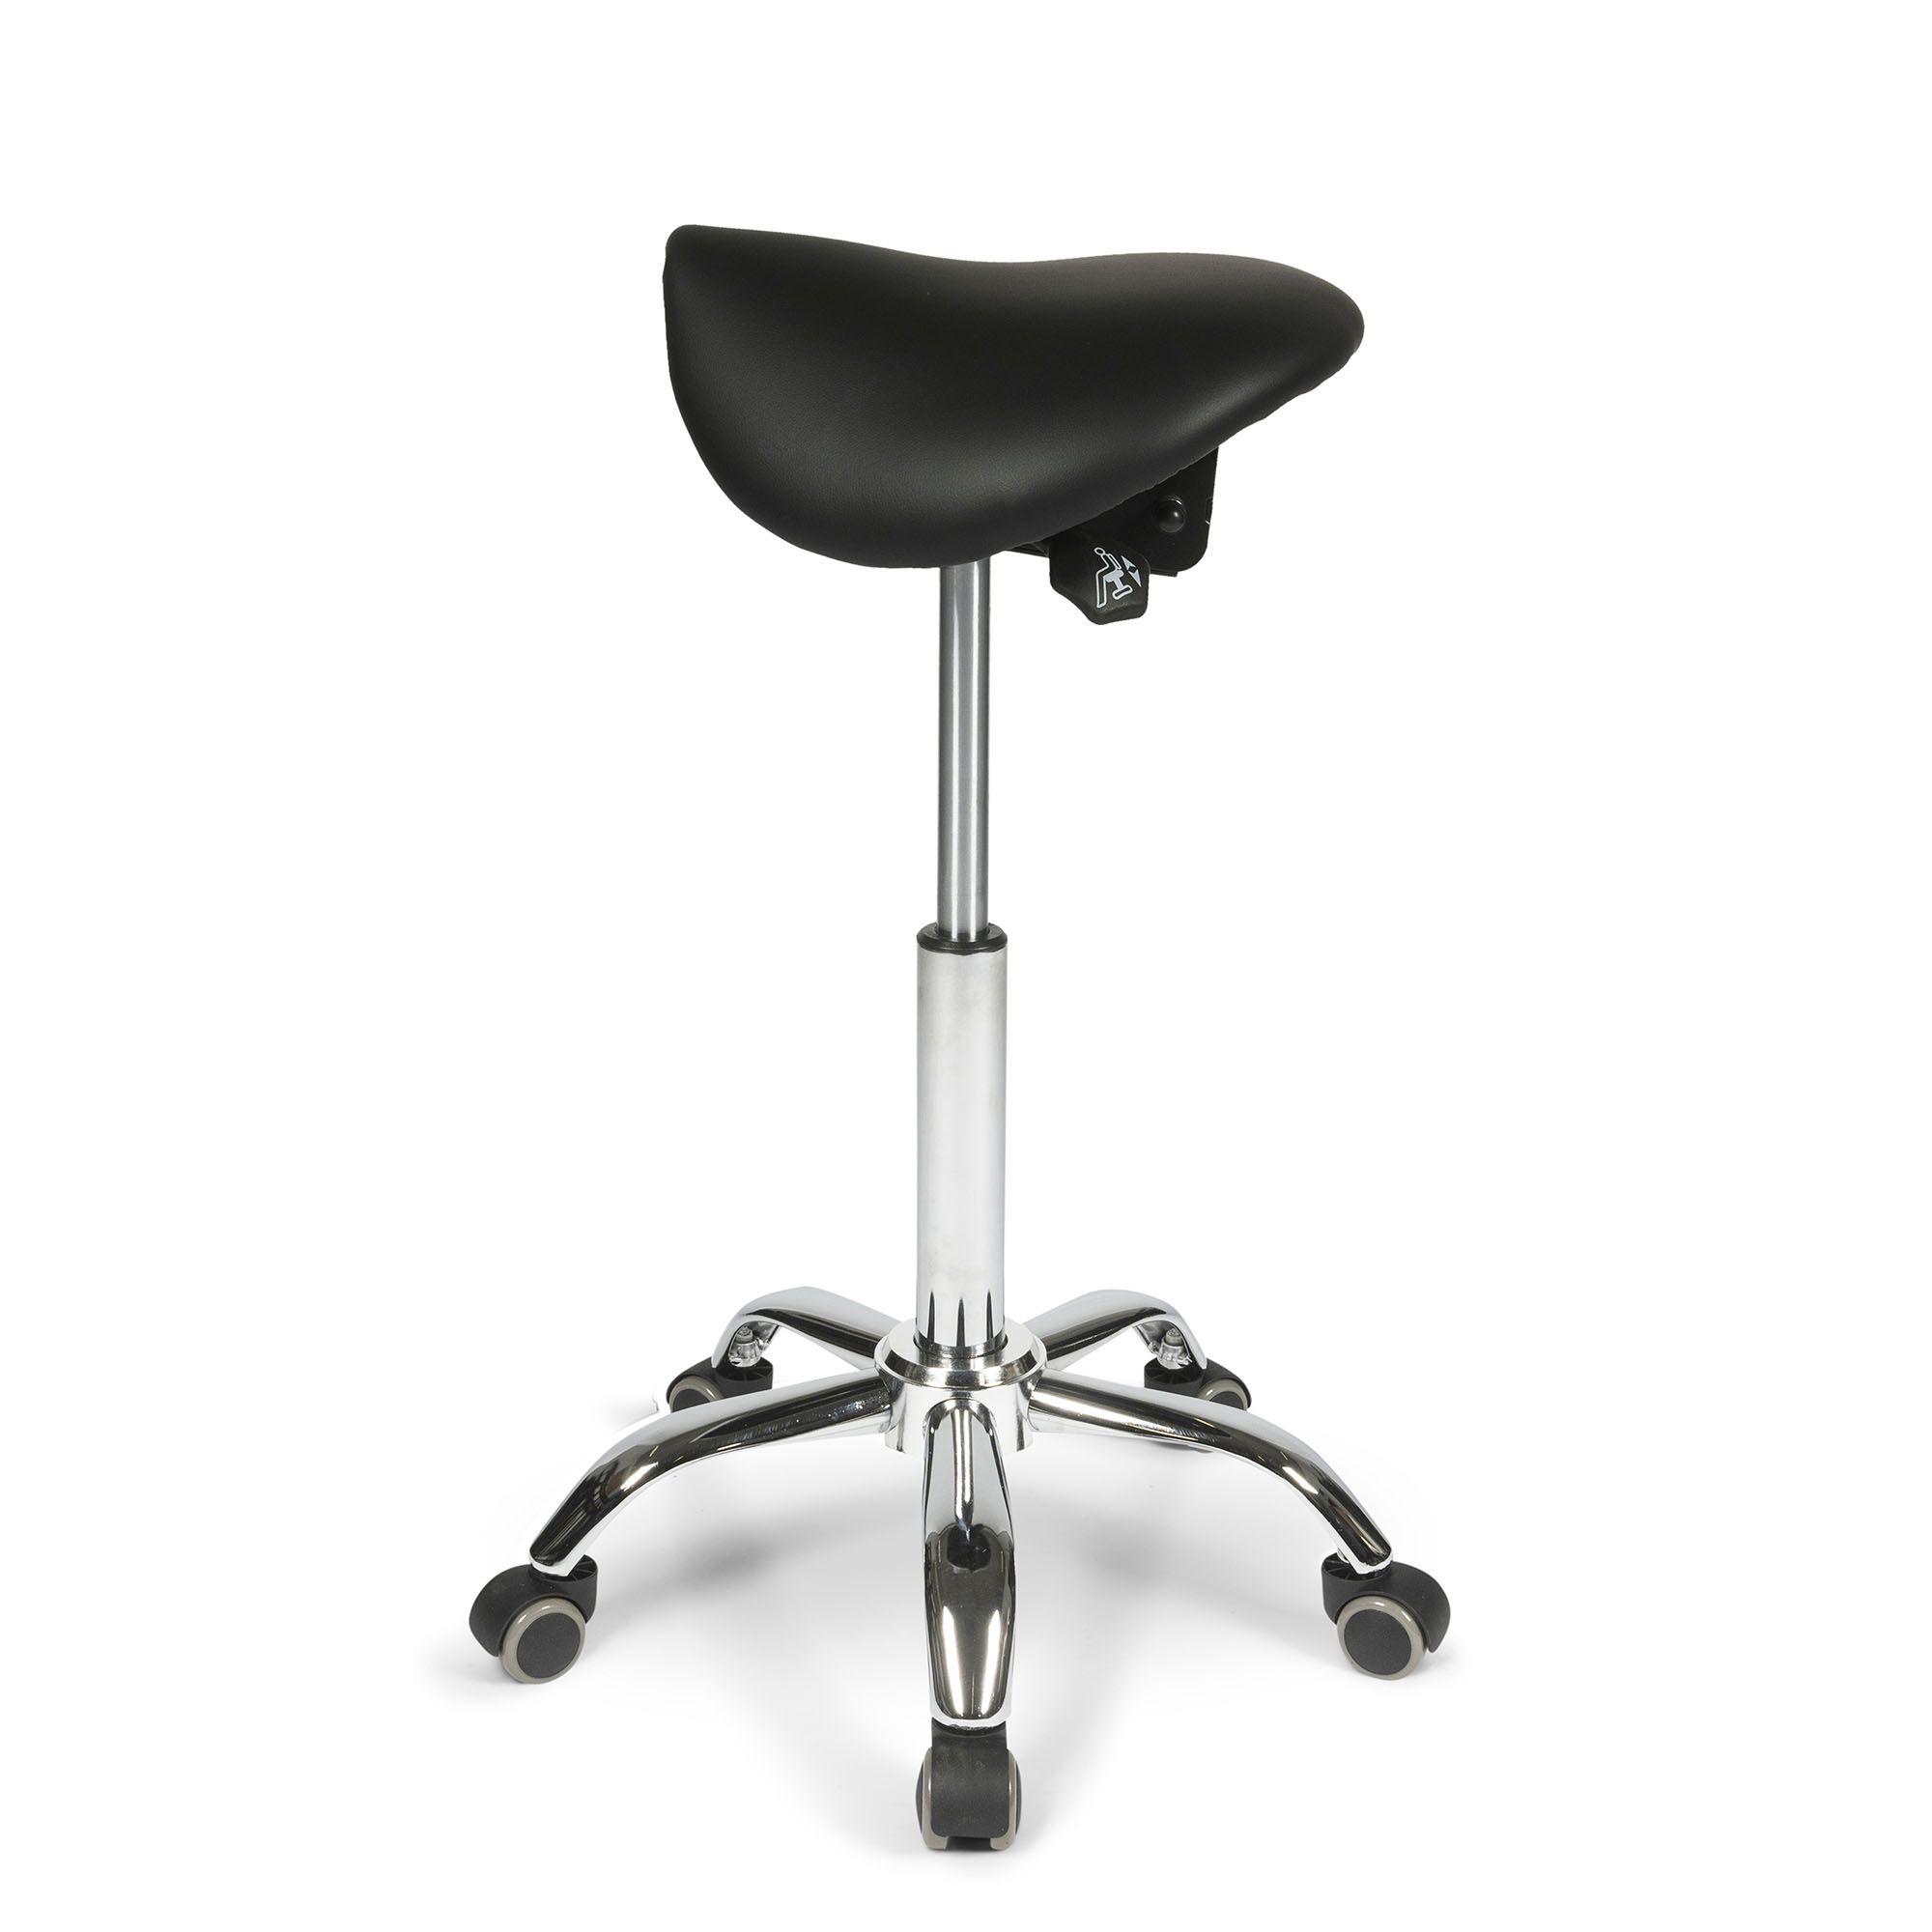 dunimed ergonomic saddle stool with tiltable seat up and down explanation